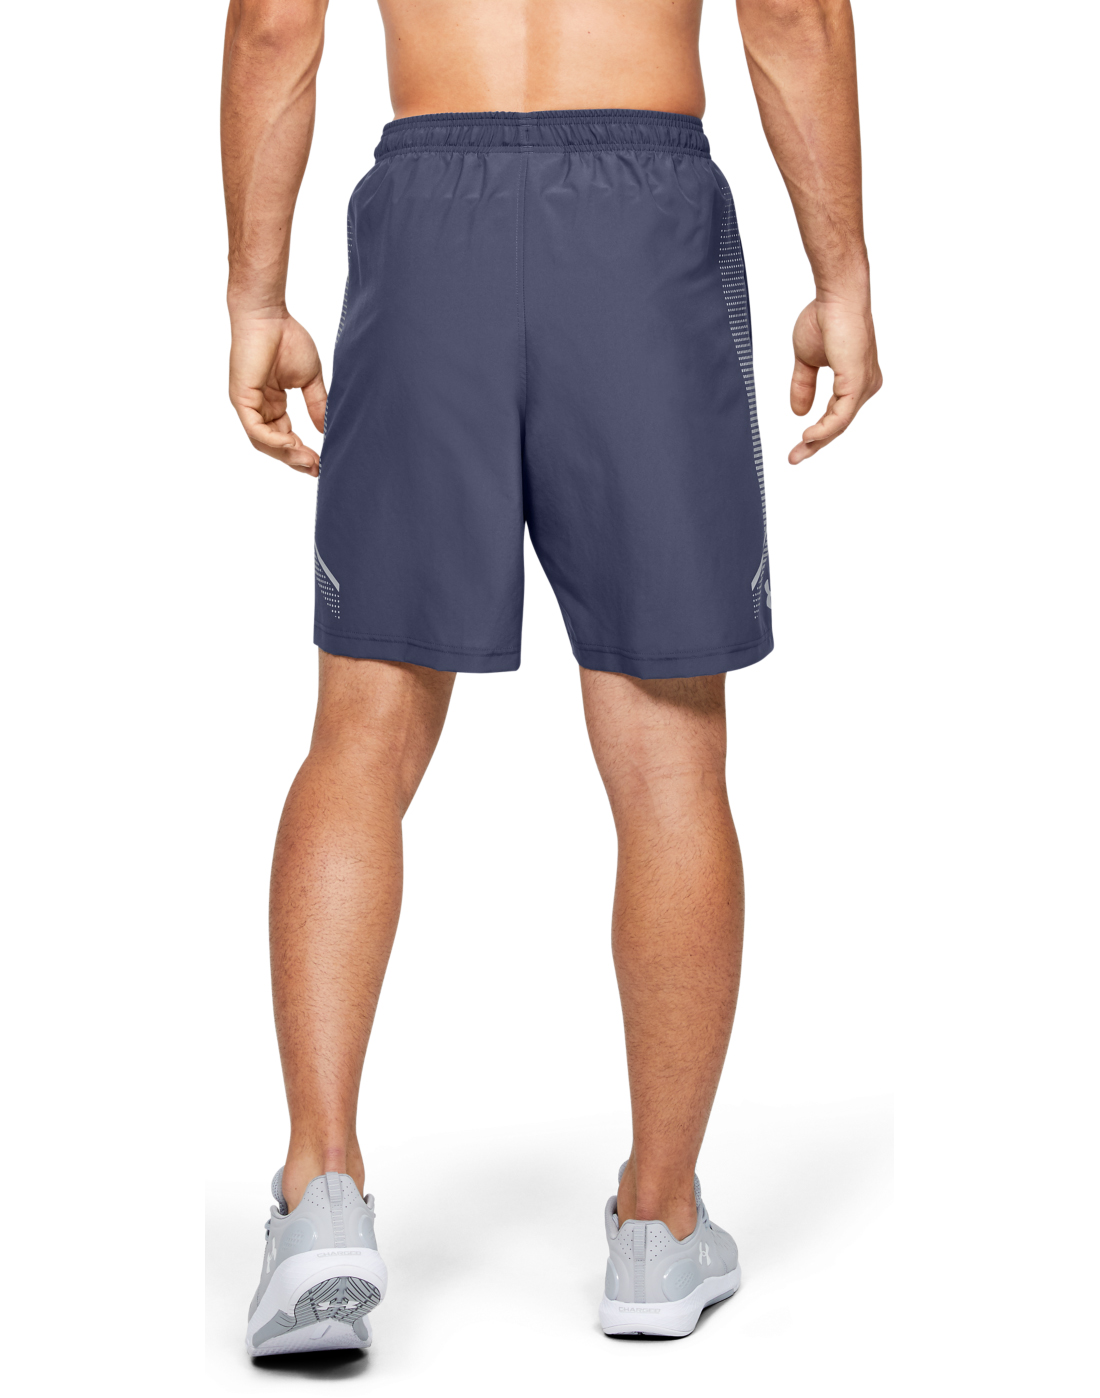 Under Armour Mens Woven Graphic Shorts - Blue | Life Style Sports IE